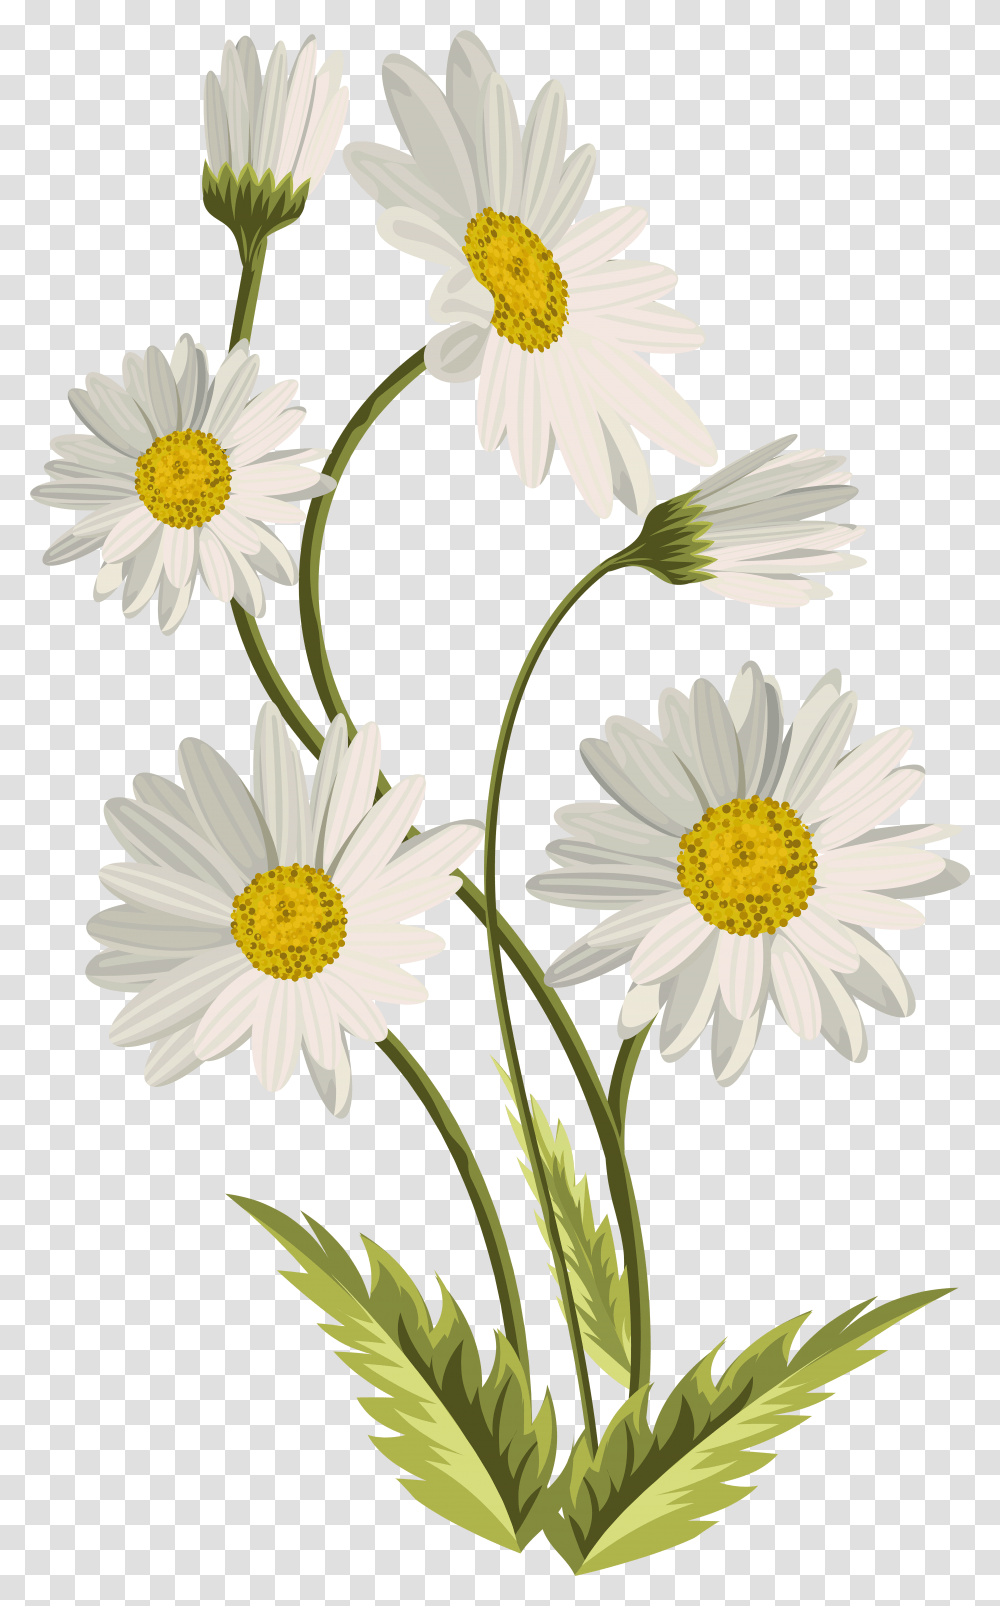 Daisies Clip Art Image Gallery Flower Clipart Background, Daisy, Plant, Blossom Transparent Png